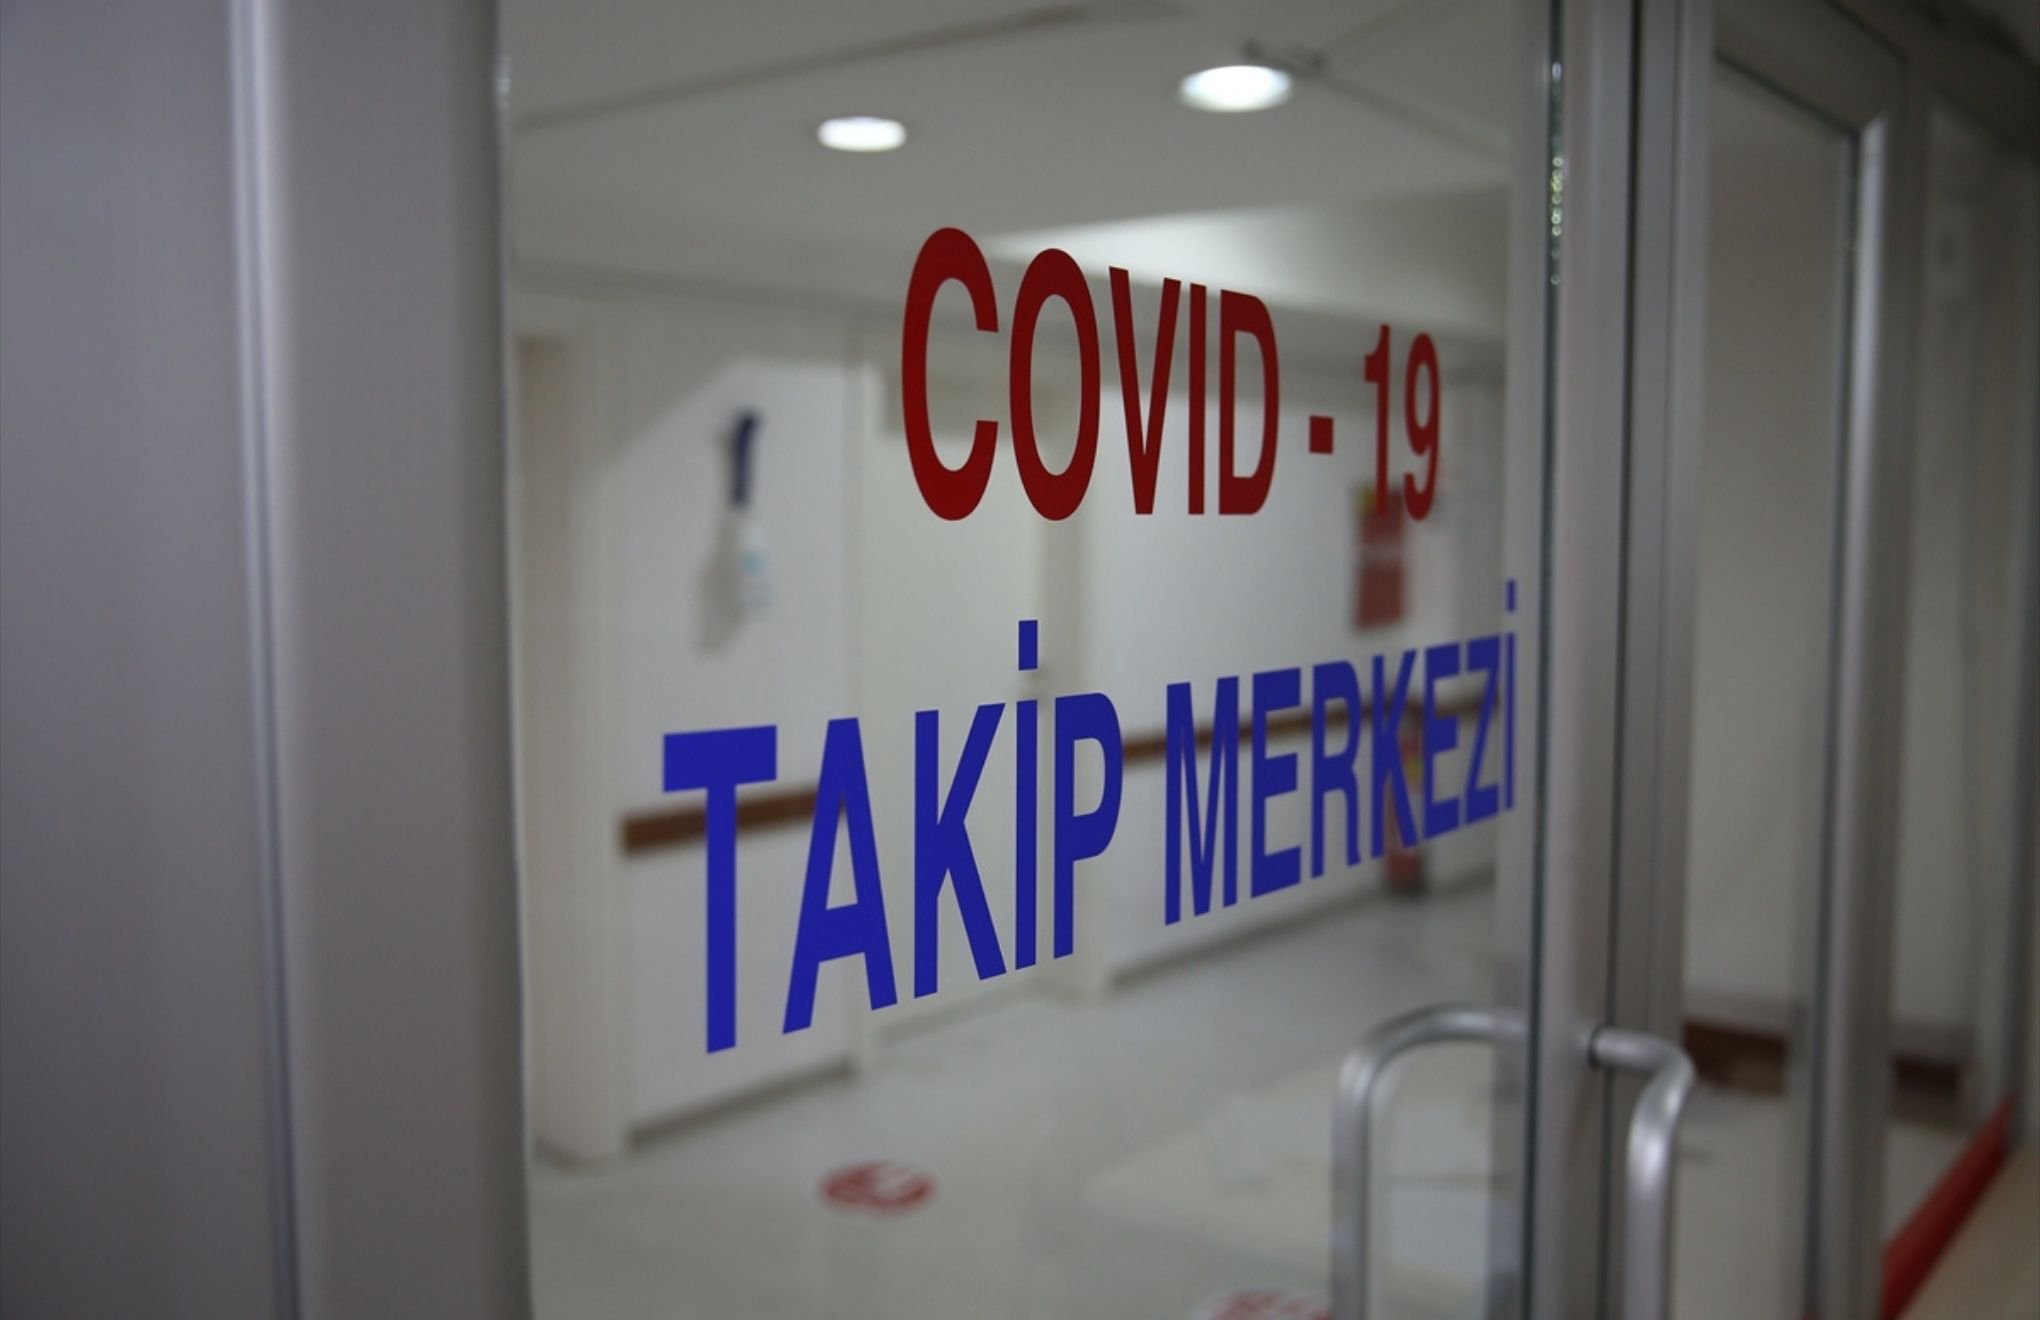 Turkey reports 63 COVID-19 deaths, over 16 thousand new cases